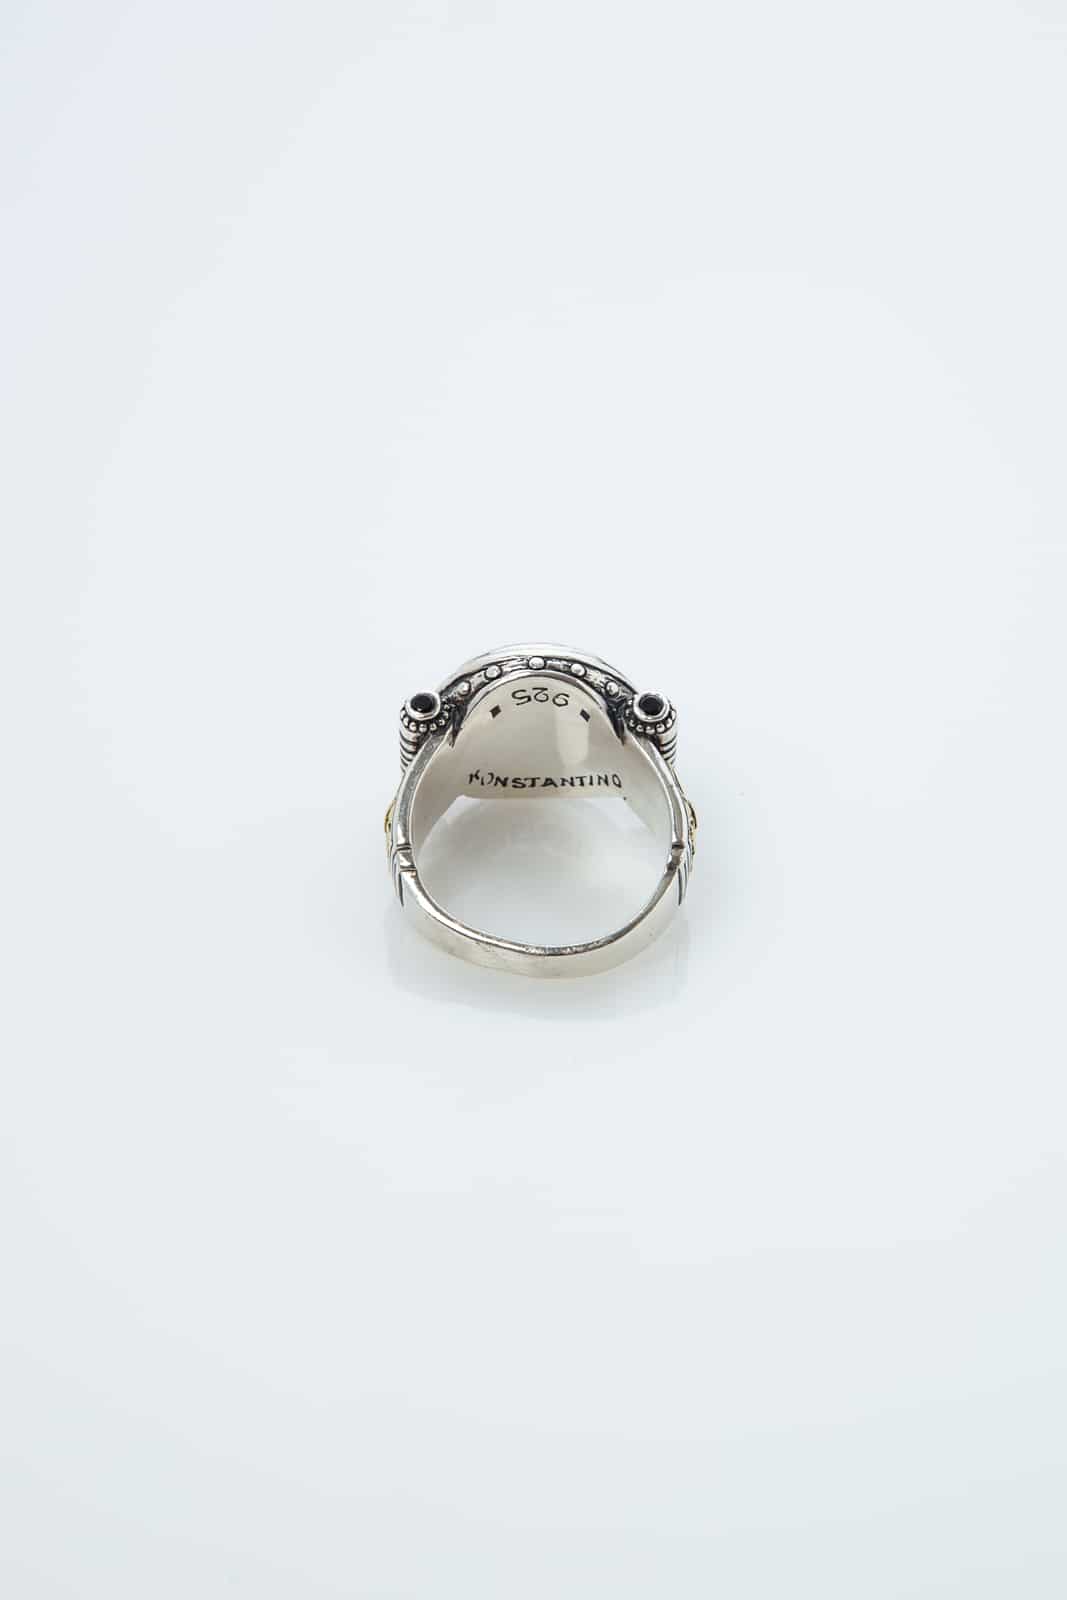 COIN RING IN SILVER - 18K GOLD & COPPER MOTIF OF ALEXANDER